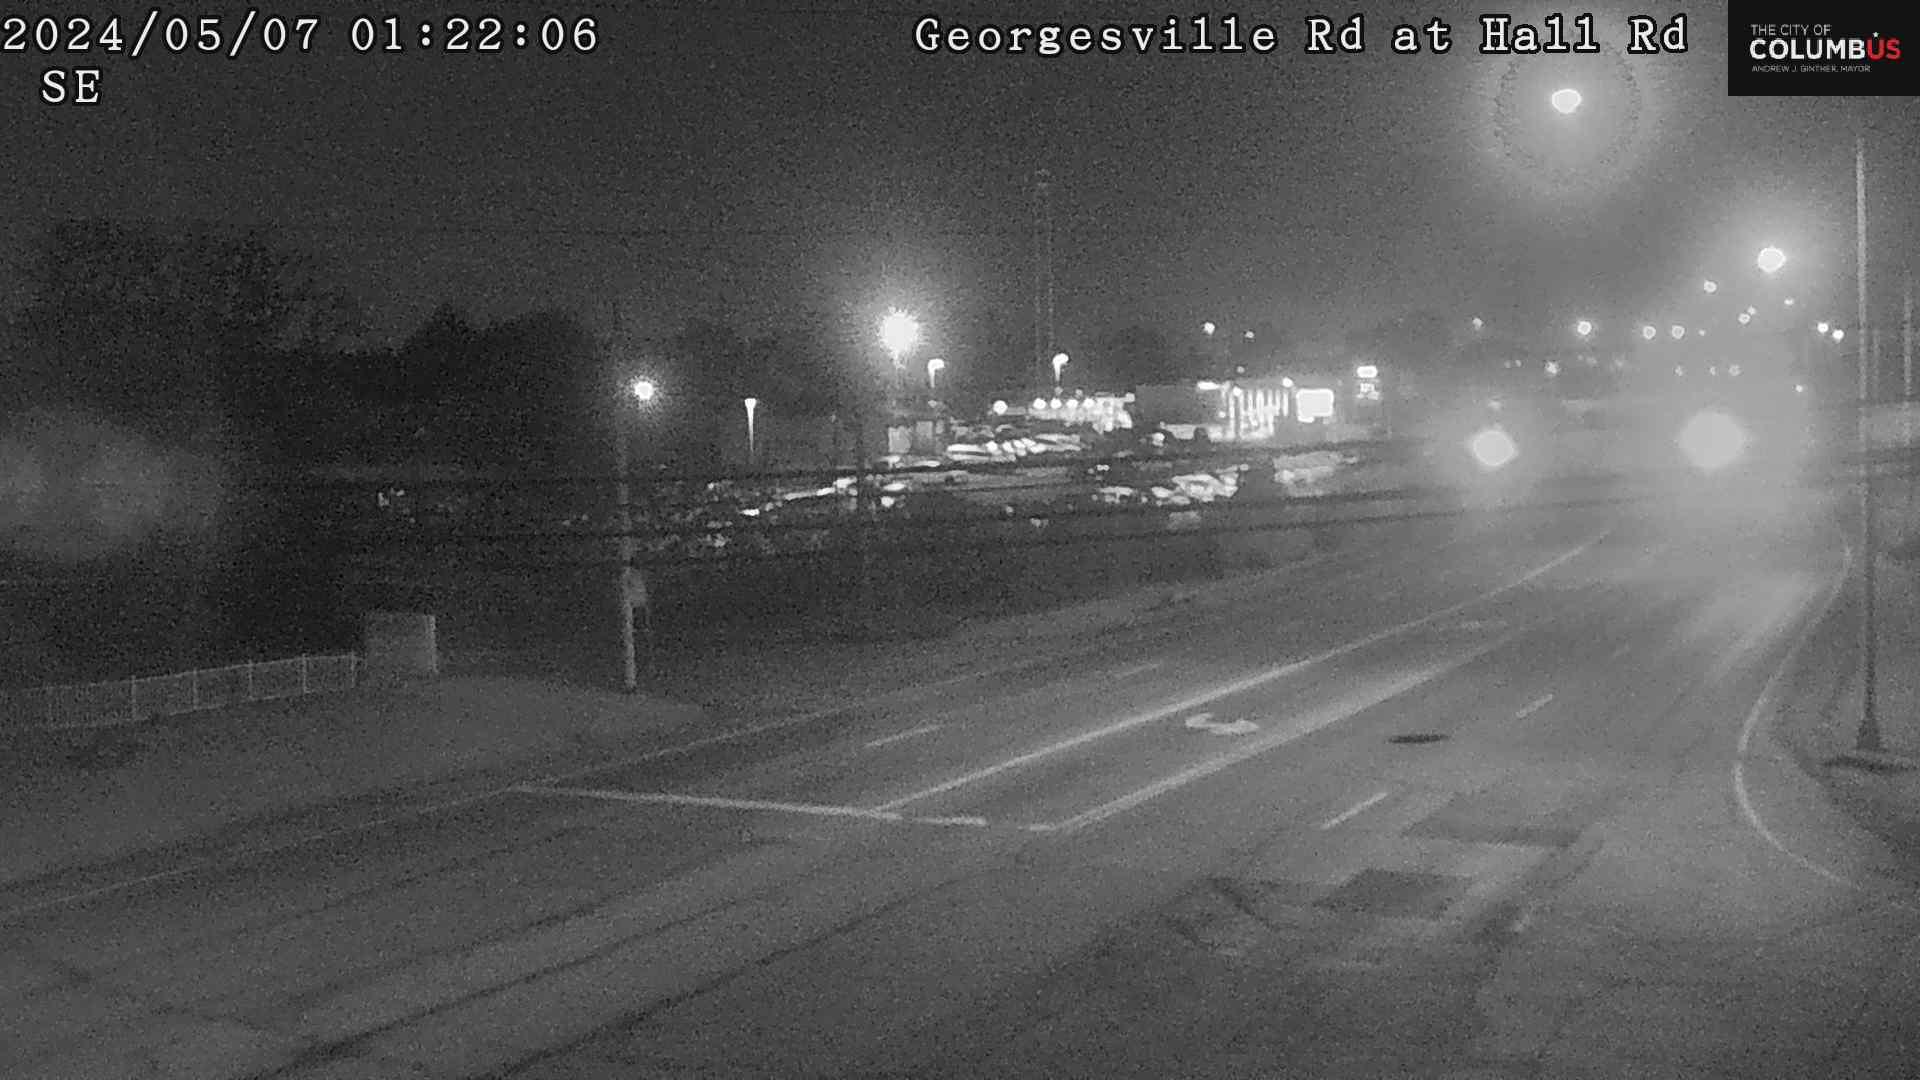 Traffic Cam Columbus: City of - Georgesville Rd at Hall Rd Player